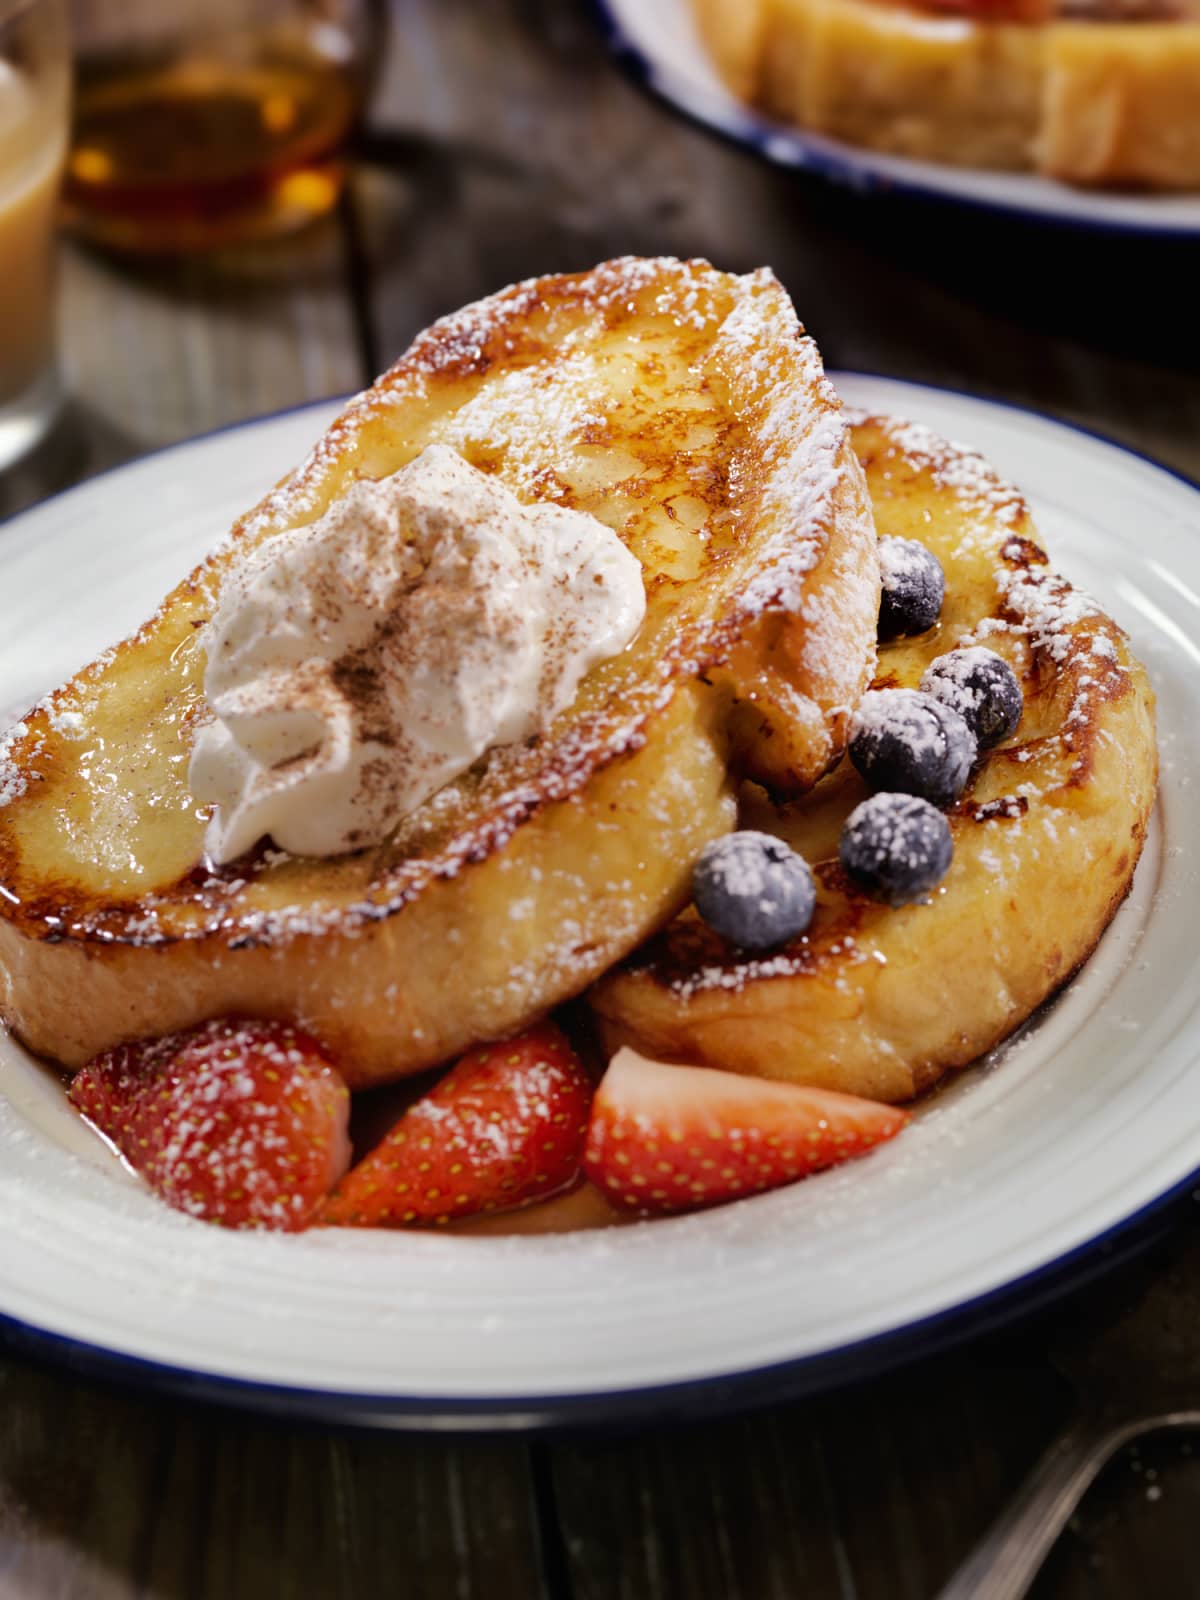 Two slices of French toast on plate with powdered sugar, fruit, and whipped cream